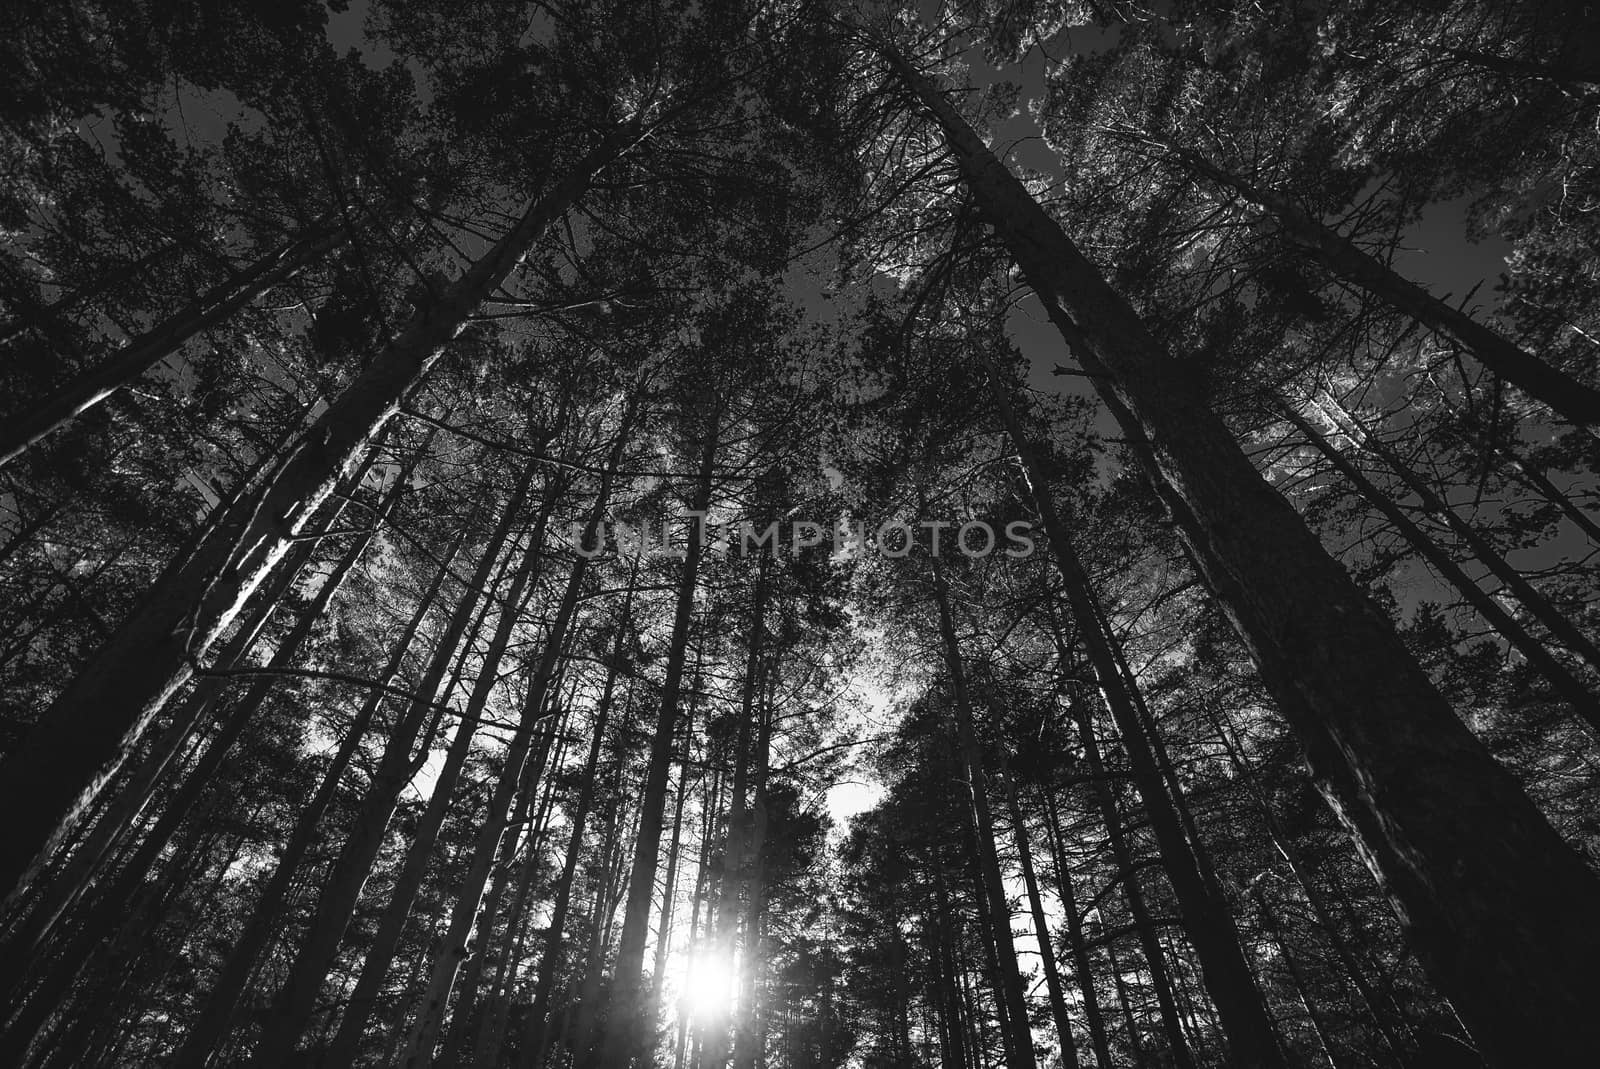 Sunset through the trees in a forest in black and white photo